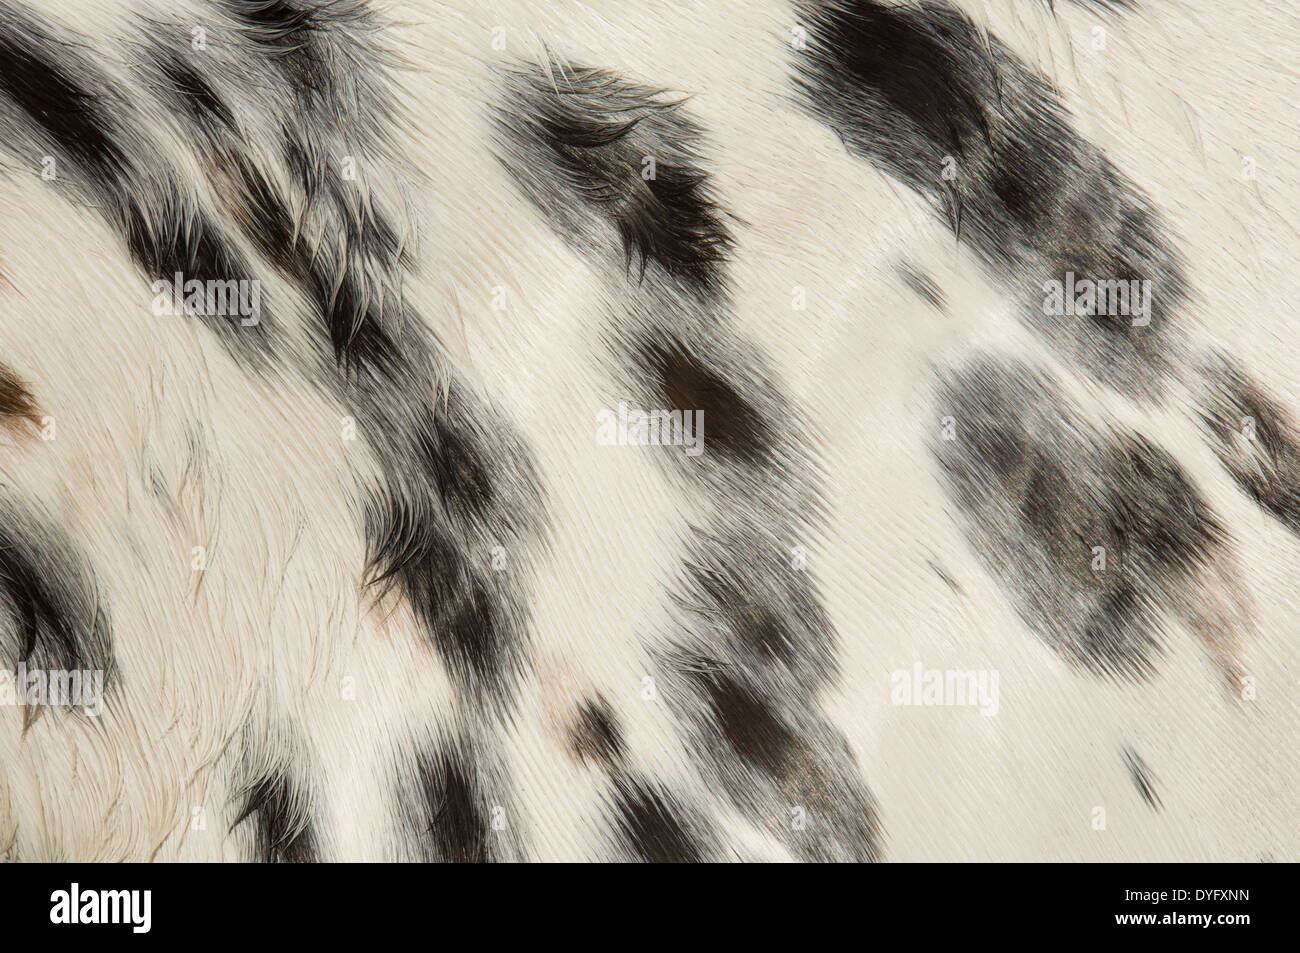 Horse coat color and pattern close up. Stock Photo